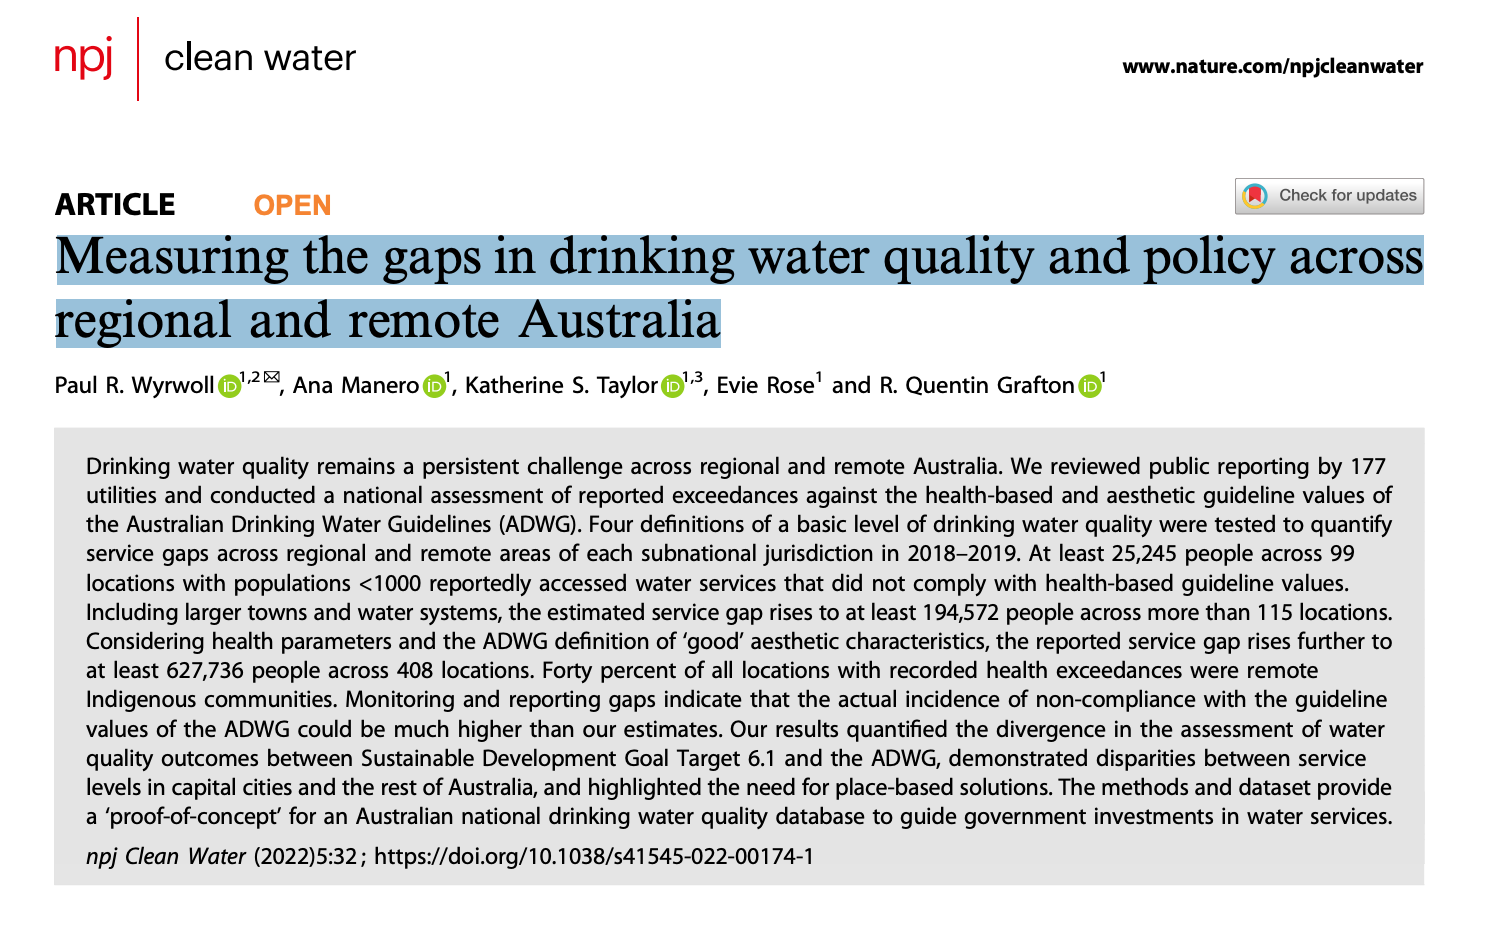 Measuring the gaps in drinking water quality and policy across regional and remote Australia